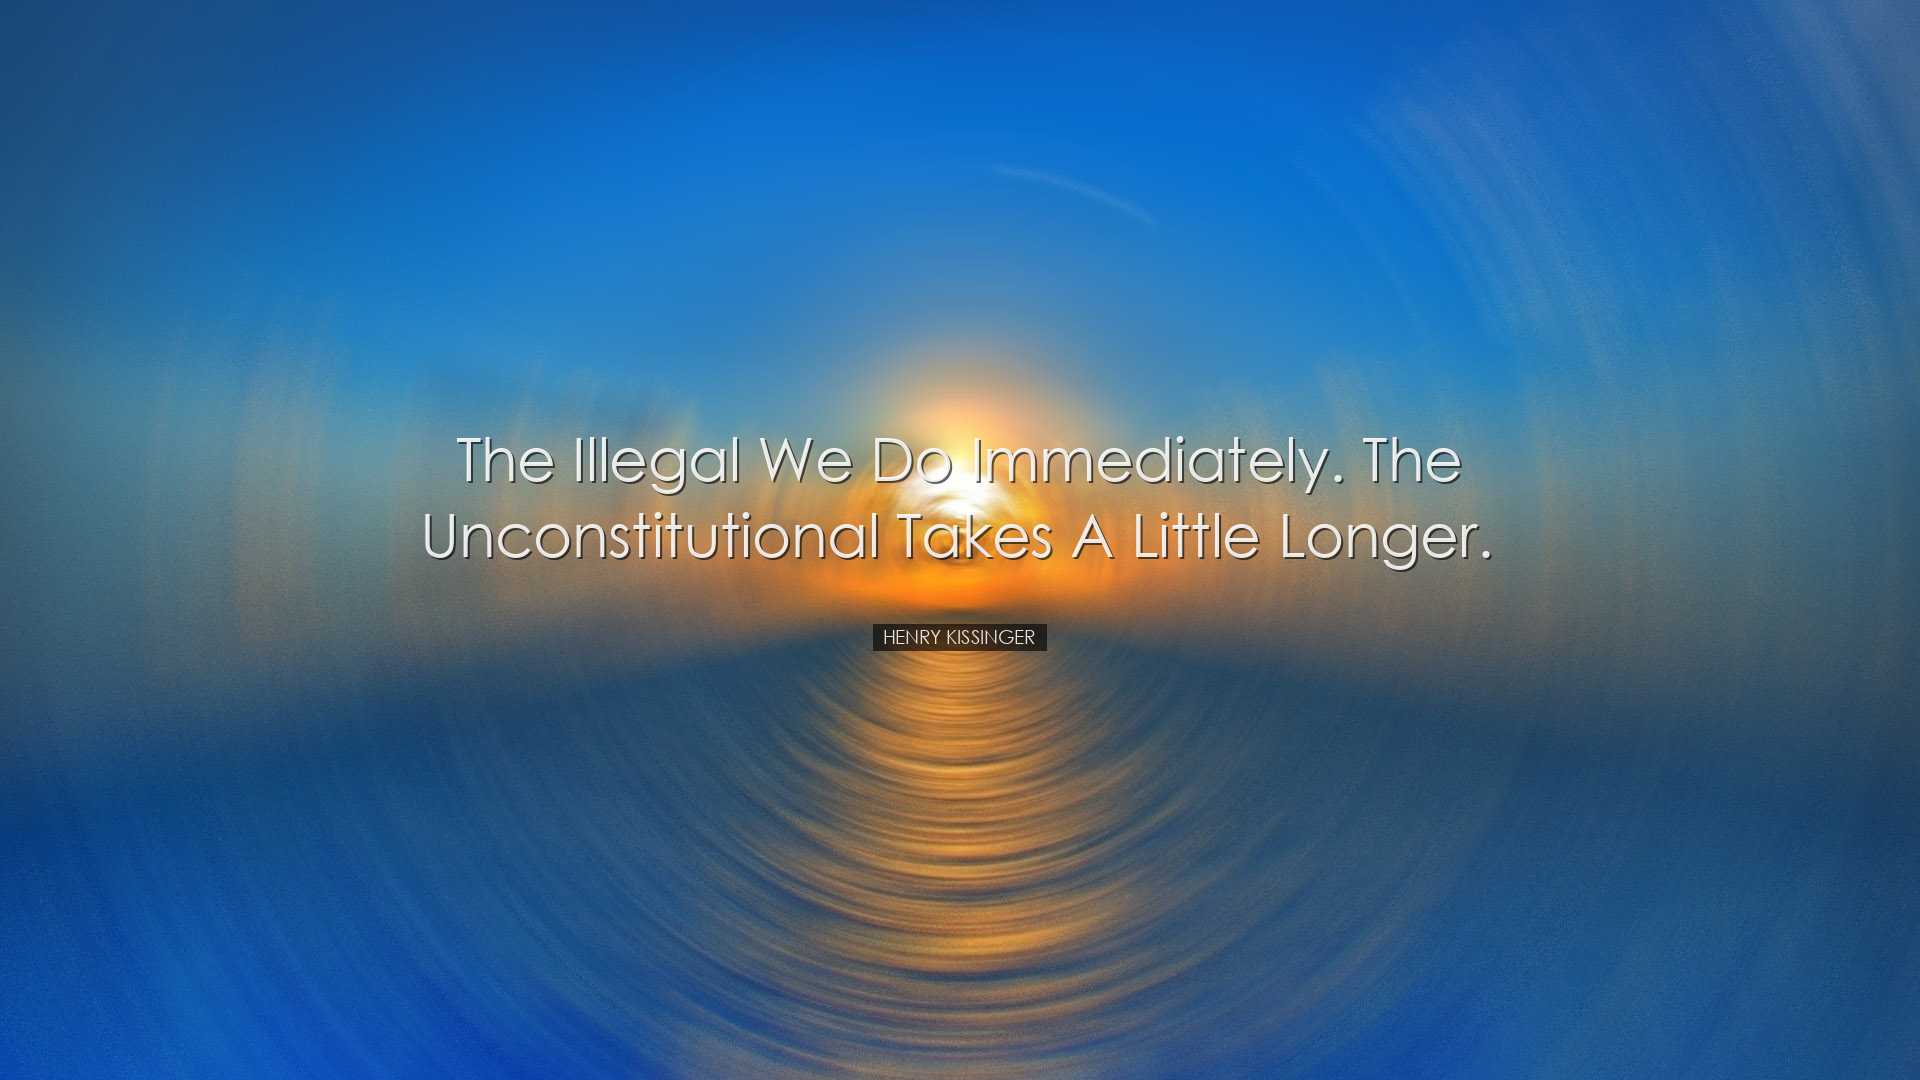 The illegal we do immediately. The unconstitutional takes a little